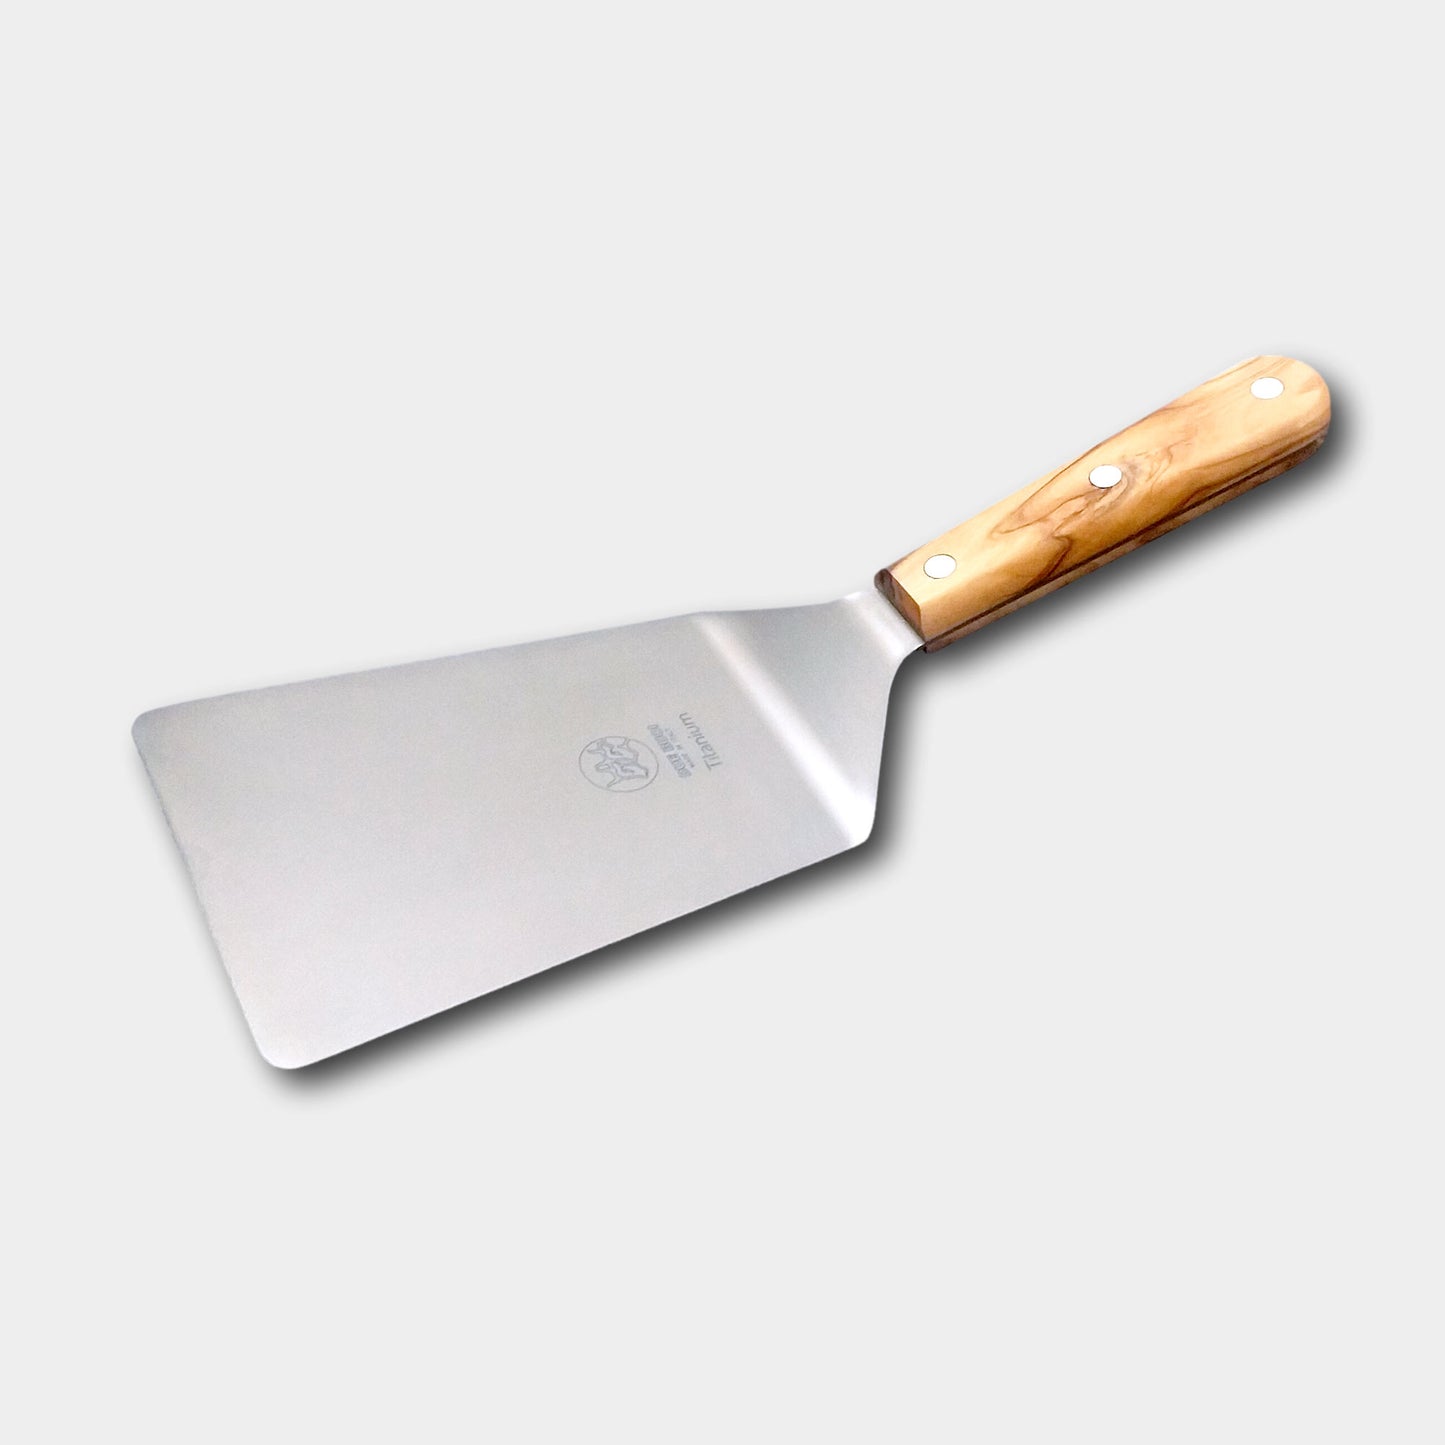 Due Buoi Small Square Spatula - Dimension 2.56 inch x 2.56 inch - Solid Stainless Steel - Professional Quality Restaurant - Kitchen BBQ Grill Griddle